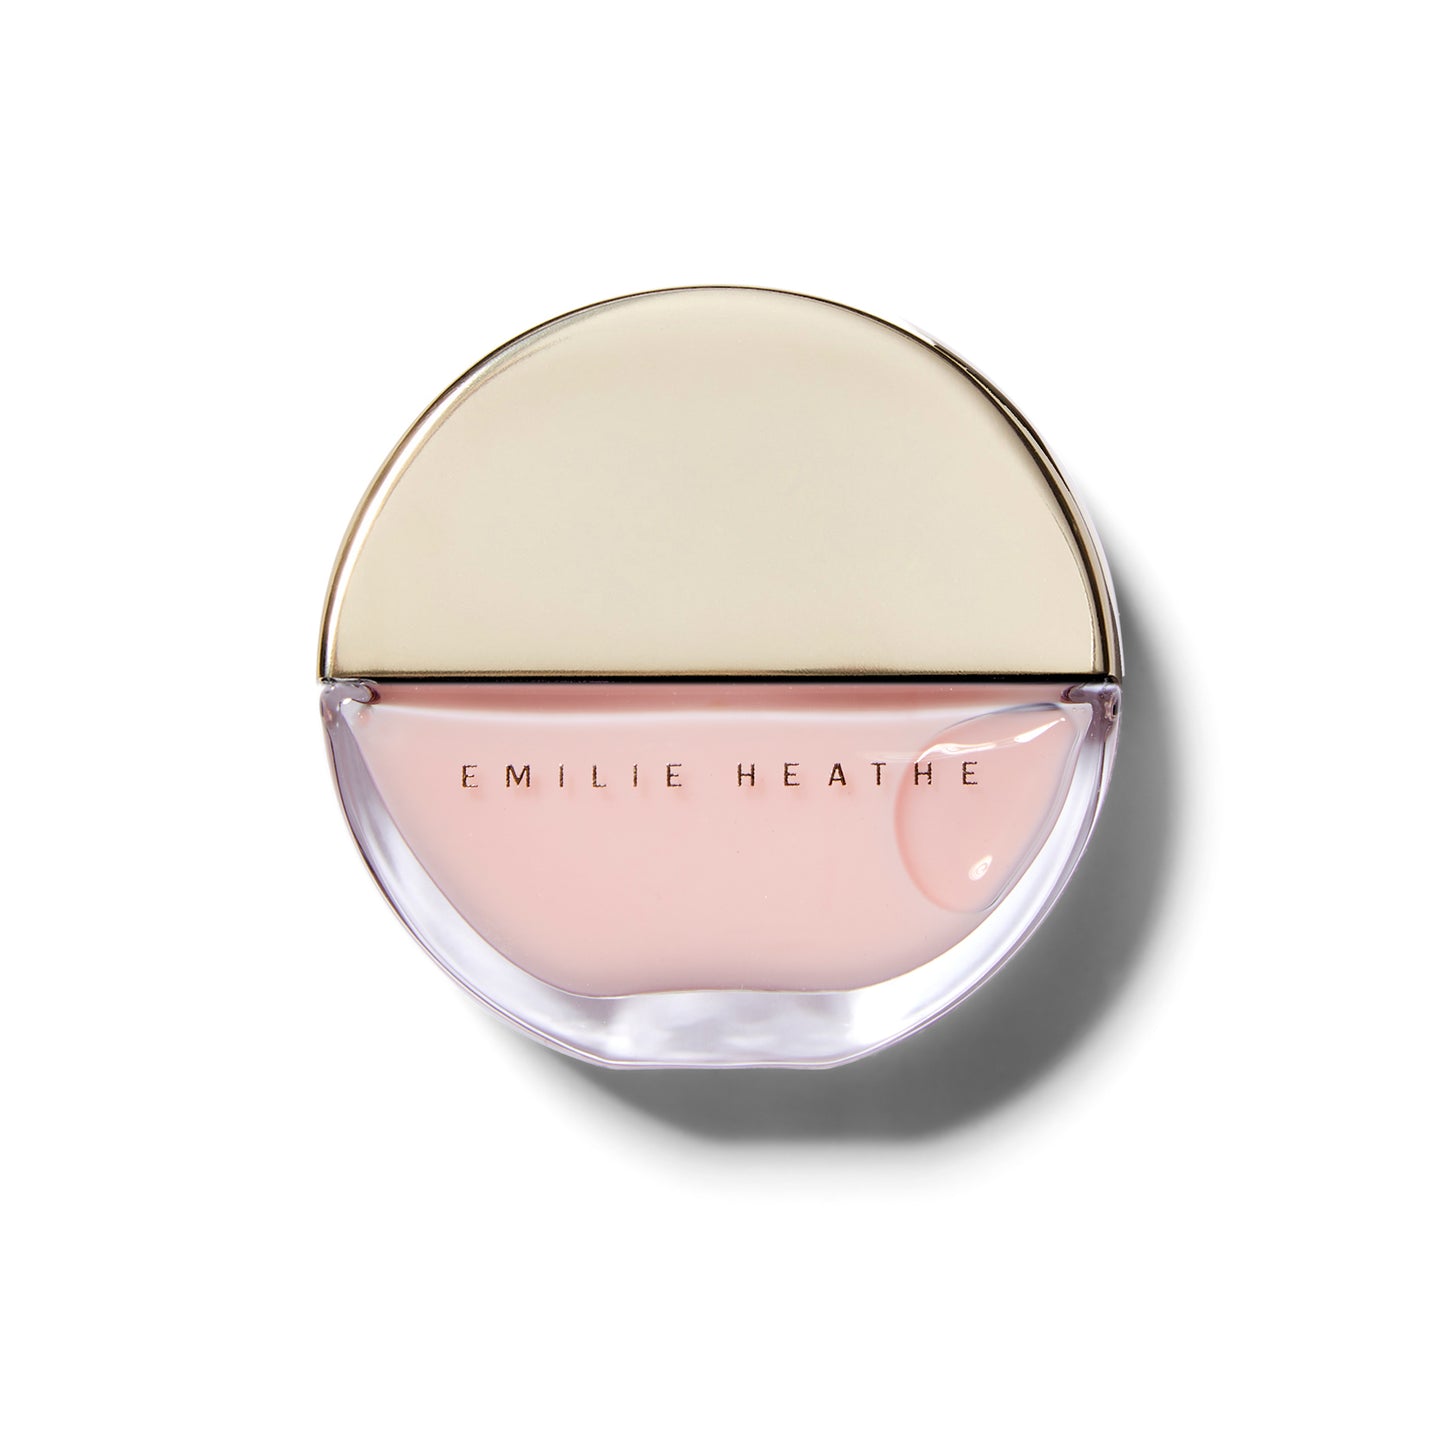 Front view of the Emilie Heathe Artist Nail Polish in Macaron. The glass bottle is round with a gold top.